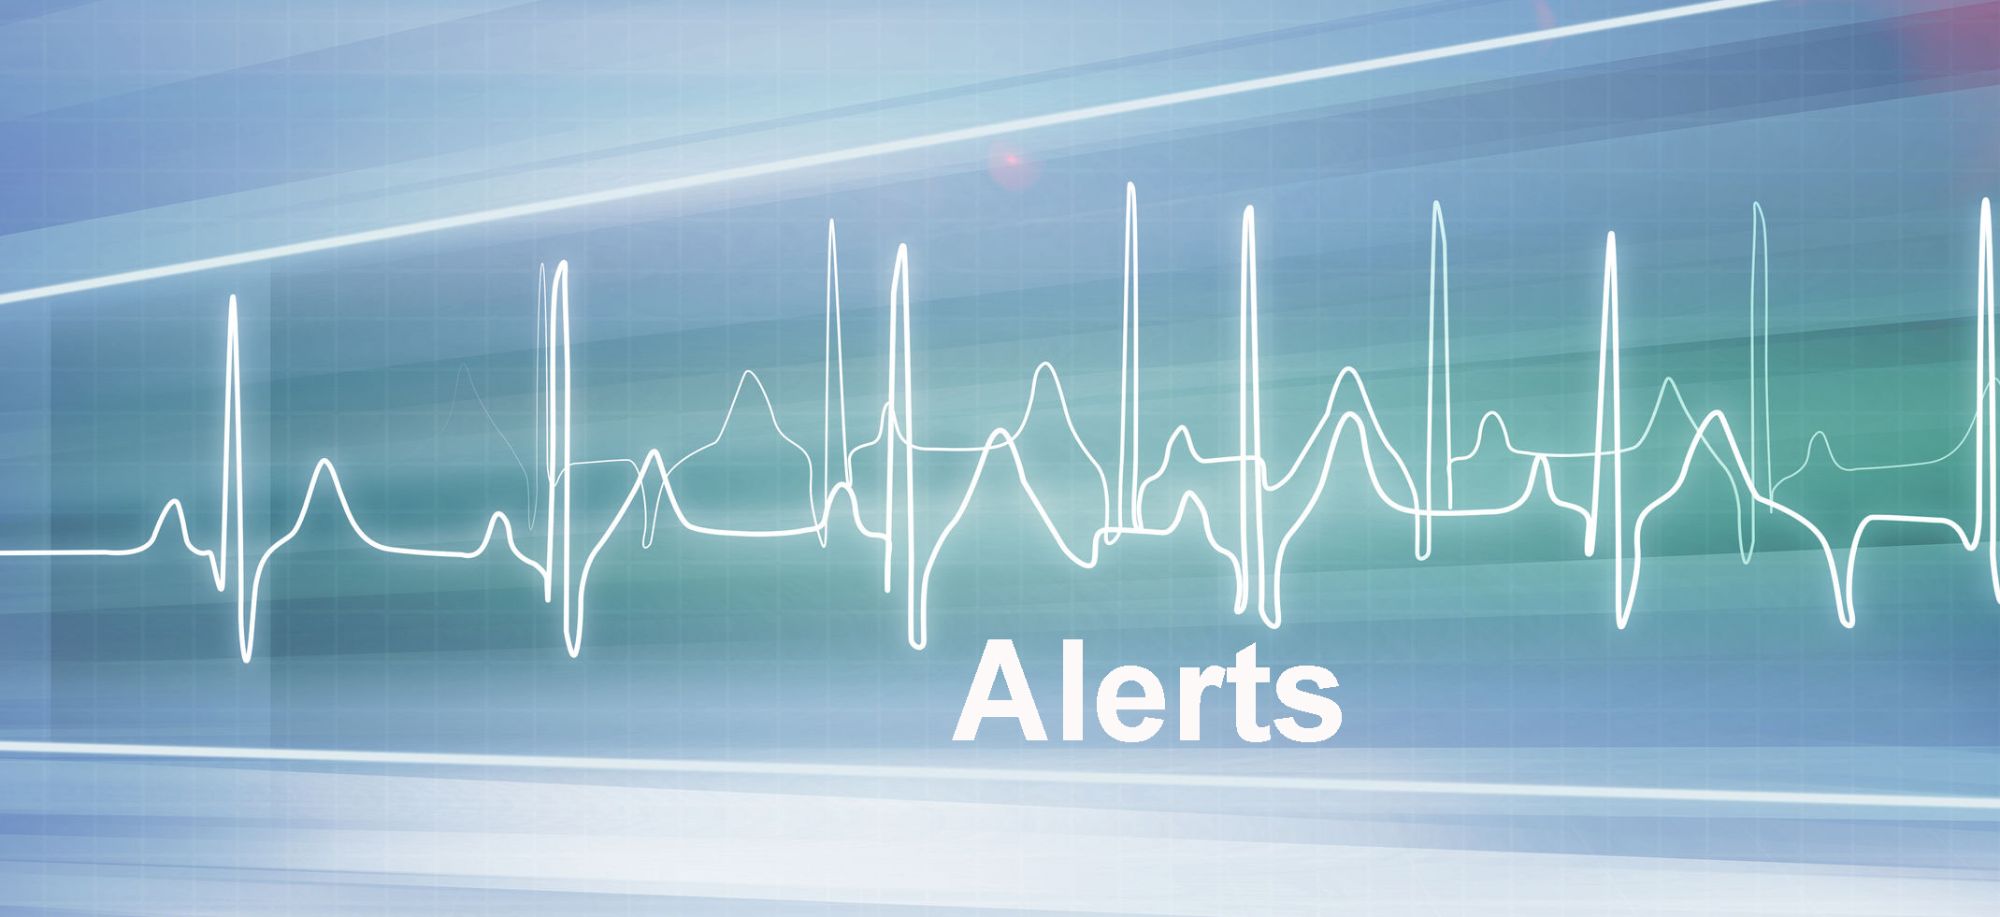 Slide Image. Vector image  - montage of heart trace with the word "Alerts" contrasted in white letters